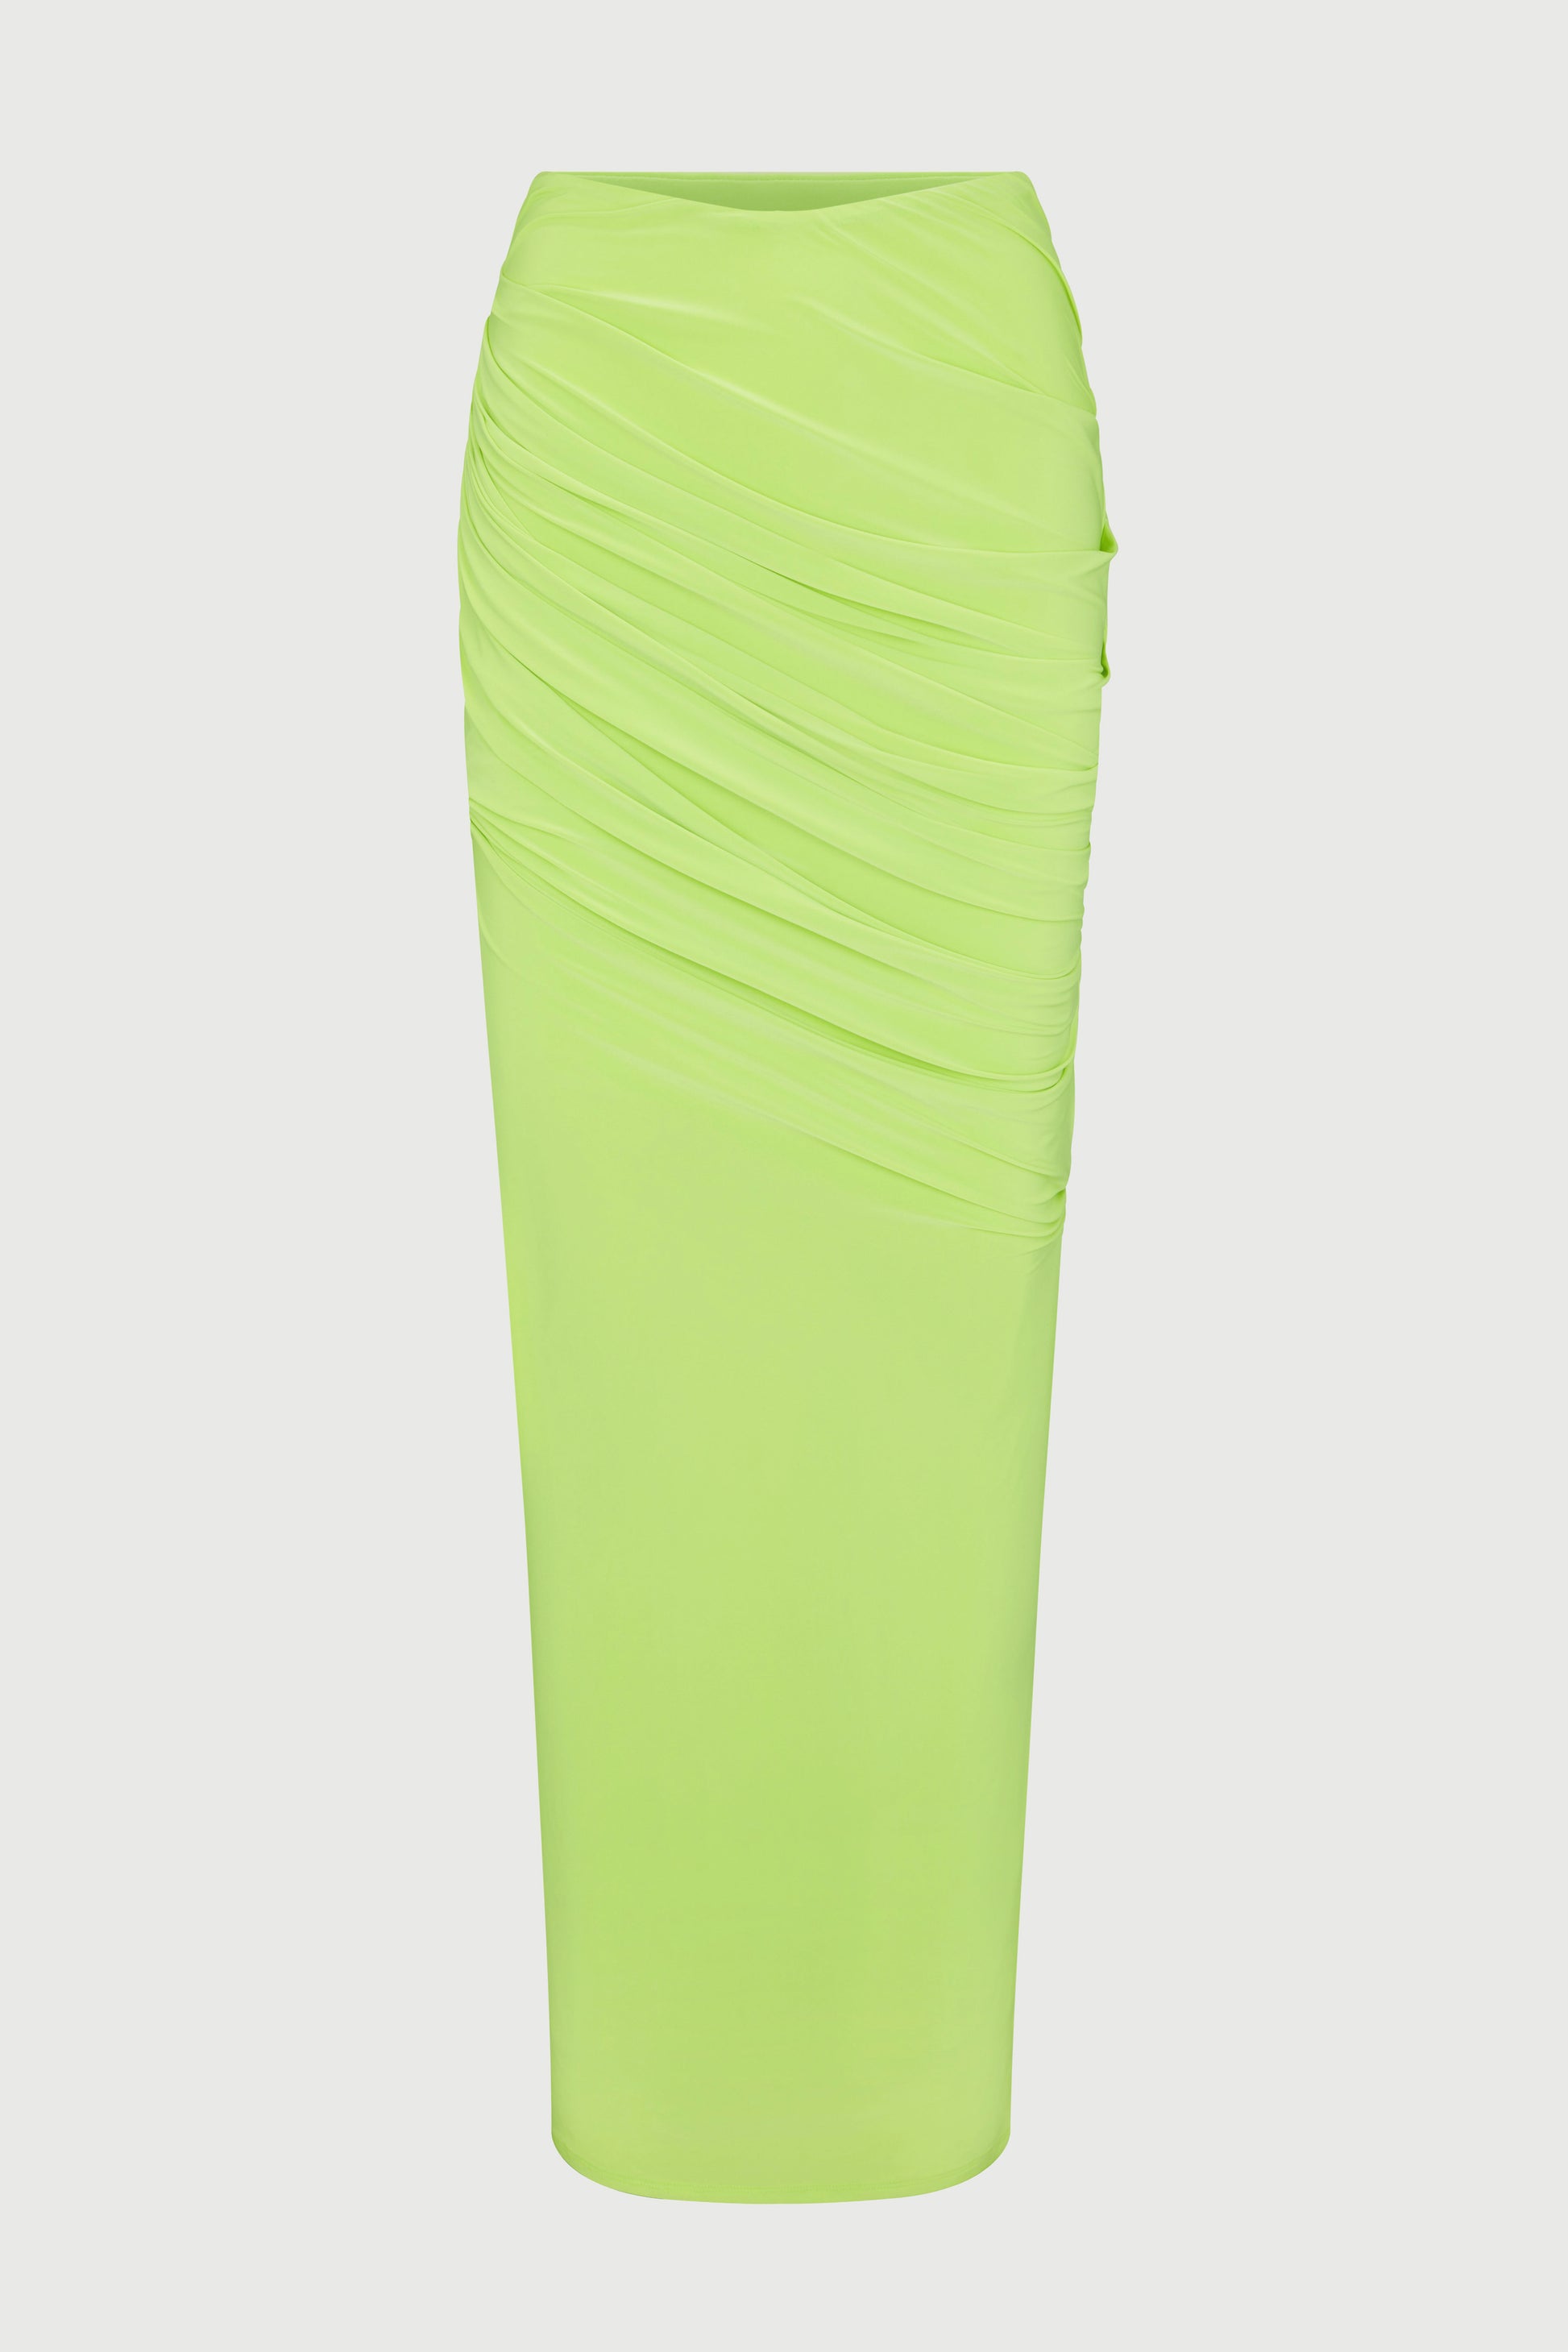 Lime green ruched maxi skirt on white background